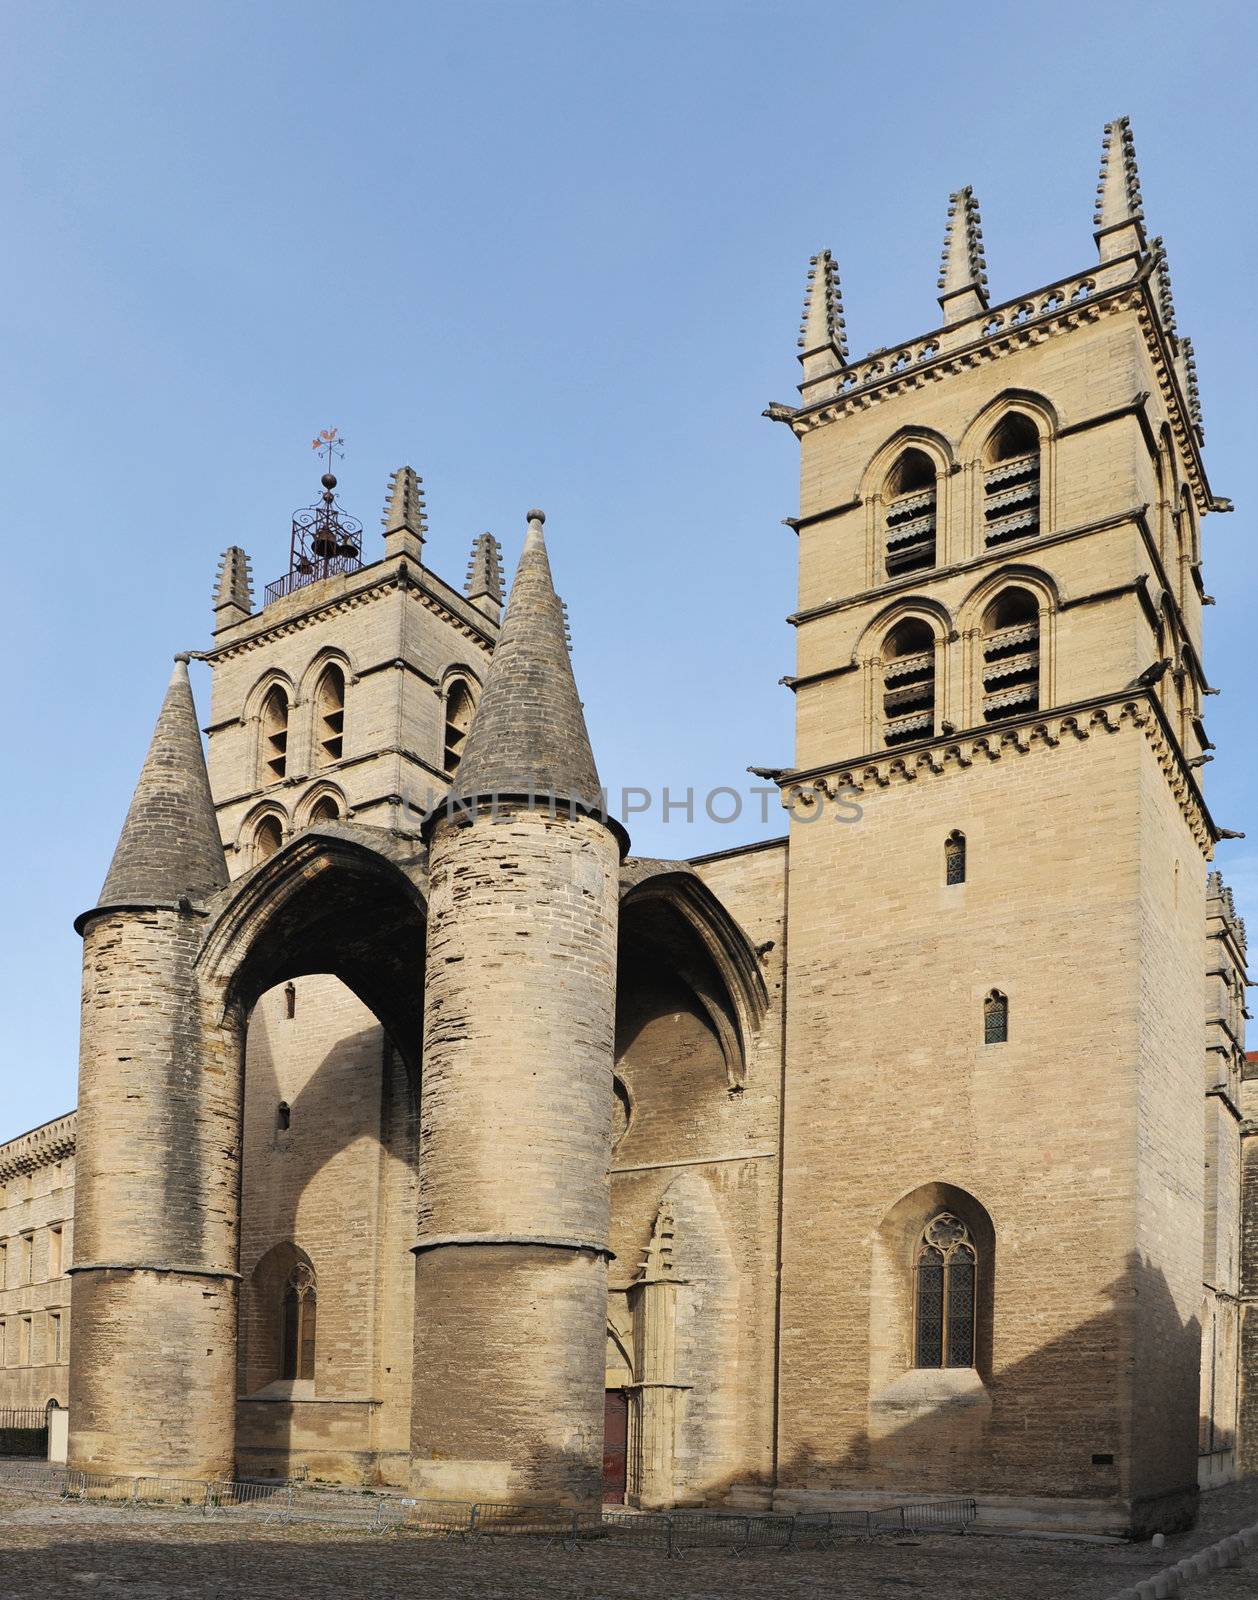 Cathedral Saint Pierre, in the sud of France, Montpellier